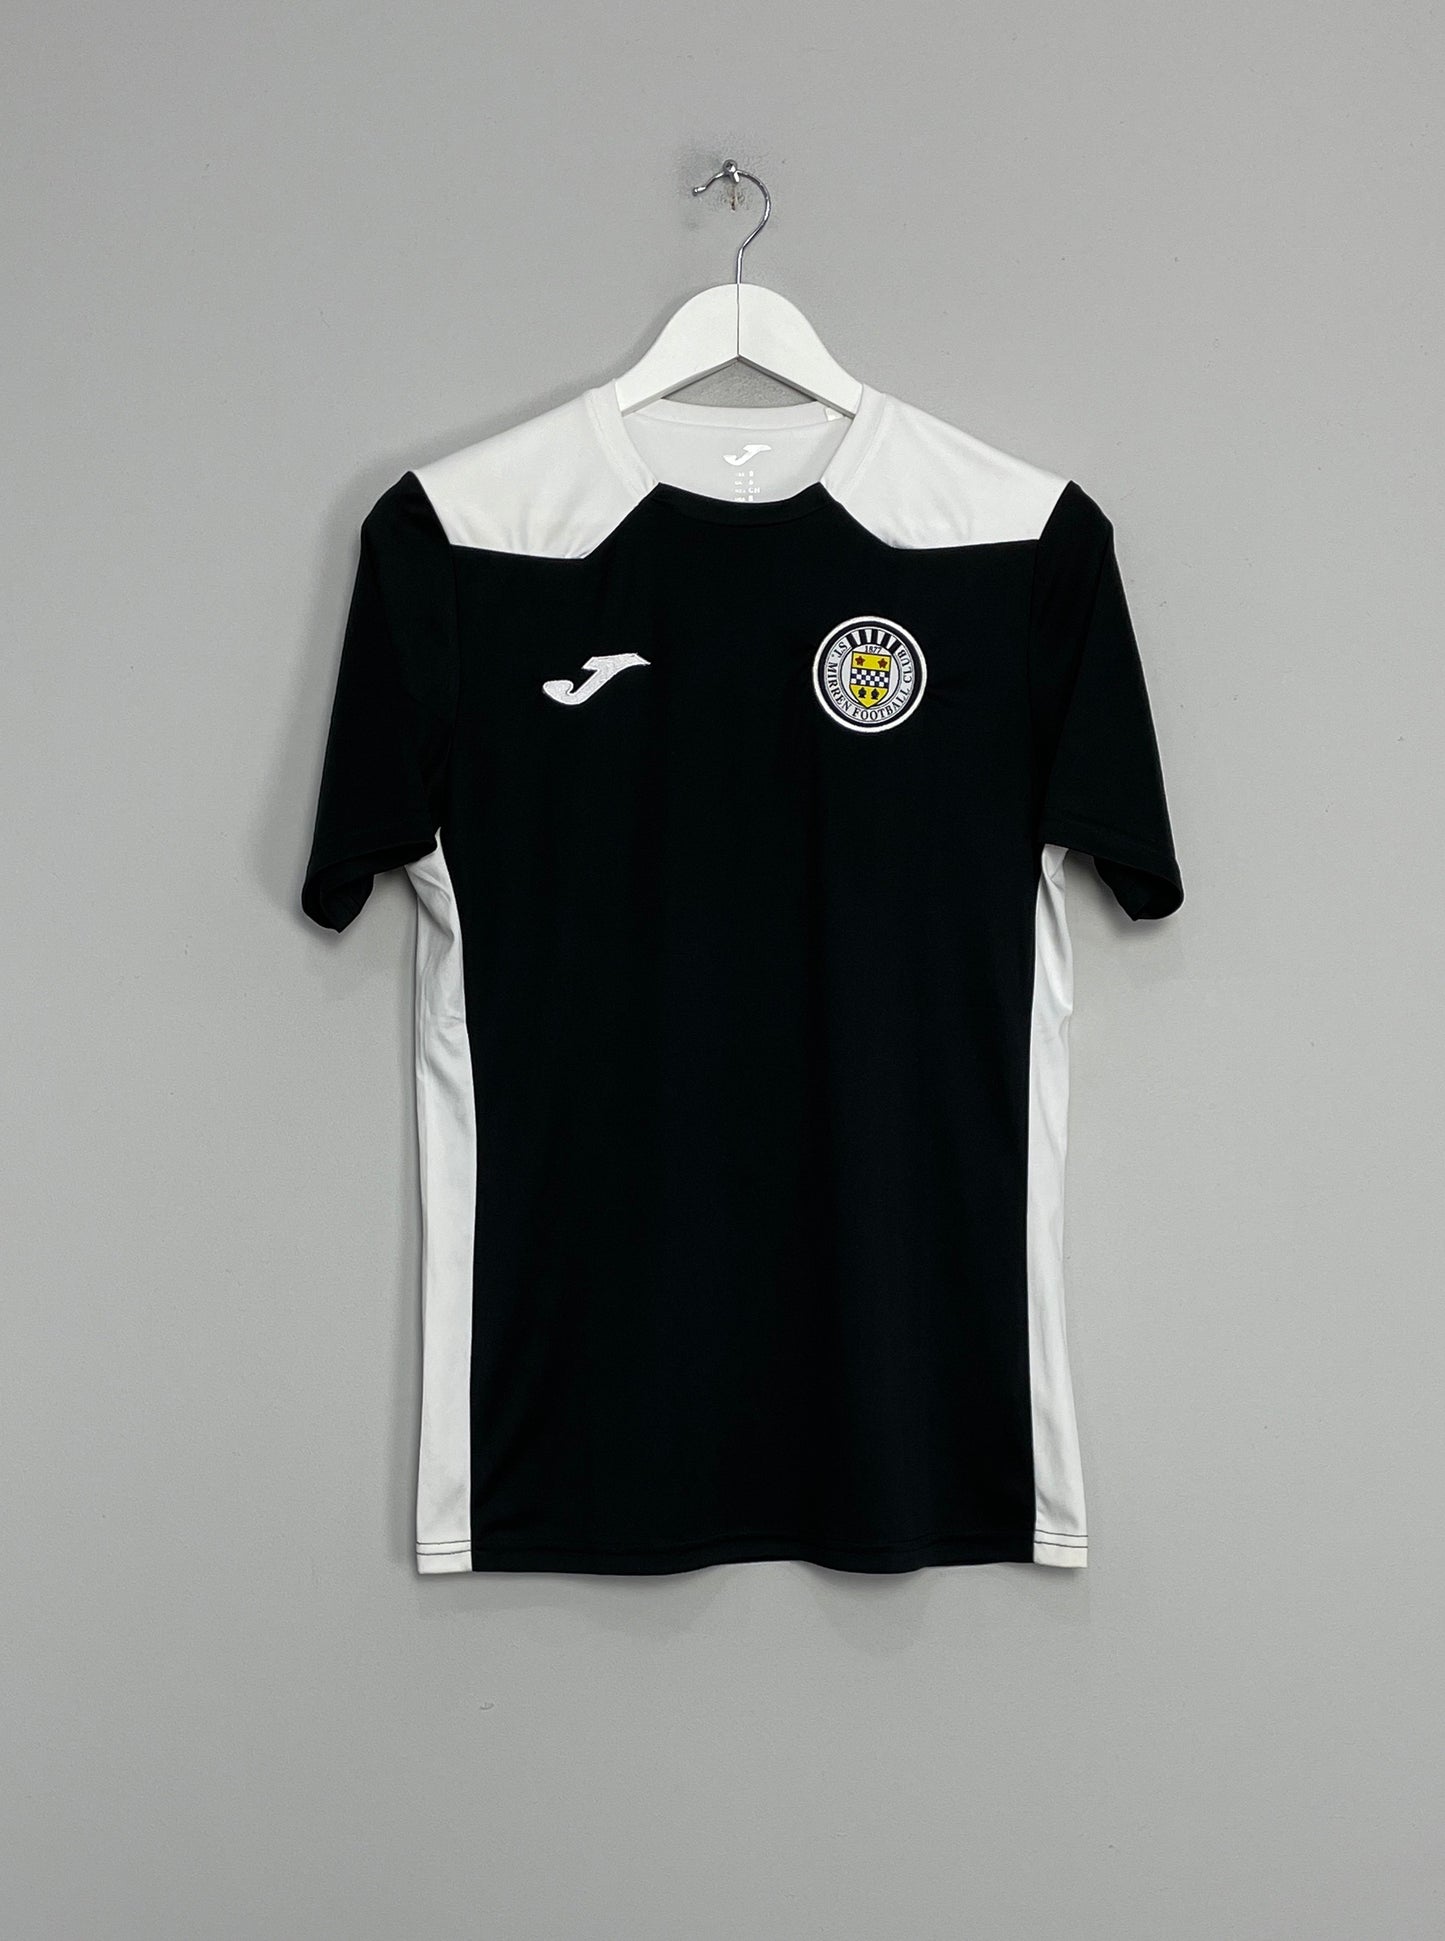 Image of the St Mirren training shirt from the 2019/20 season